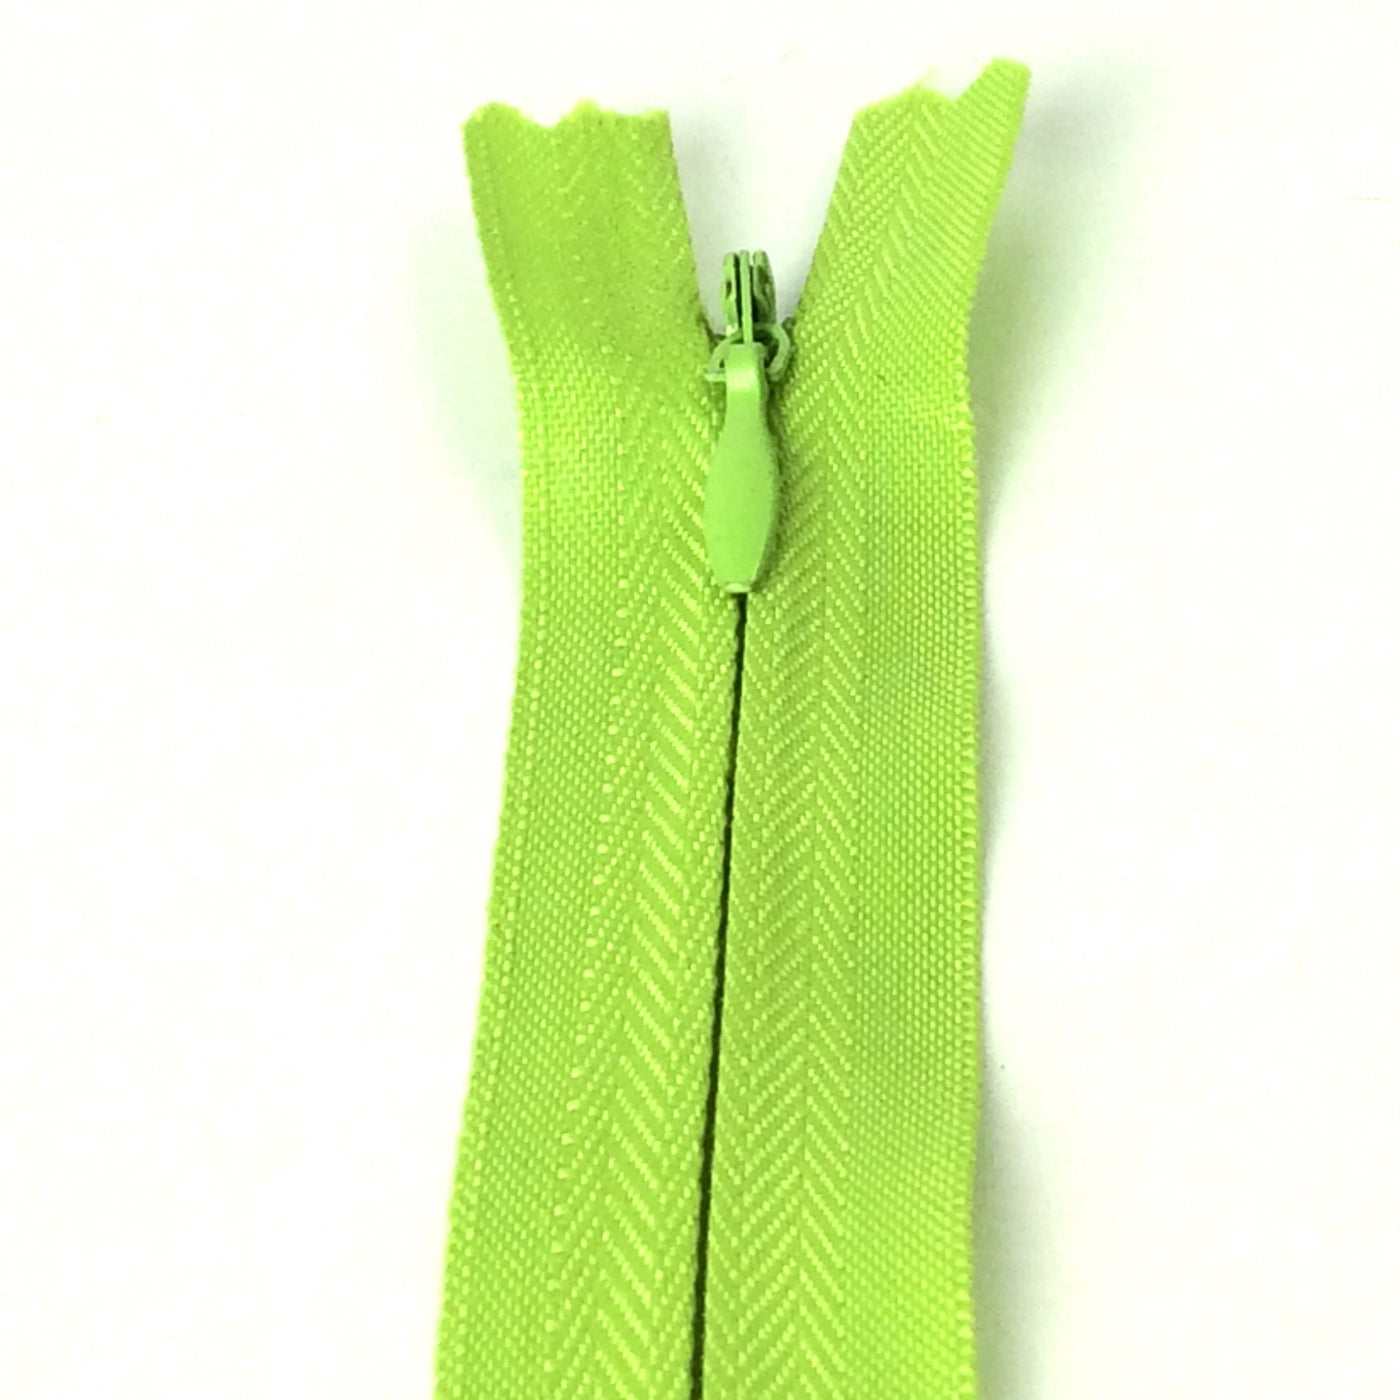 Photo of light green invisible or concealed zips available in many different colours and sizes. Great for achieving a professional finish in your products. Invisible zippers are perfect for dressmaking, cushions, crafts, etc., where you don't want your zipper showing. Installing them can be tricky without the right foot on your machine; a normal zipper foot is for installing standard zippers, while you will need an invisible zipper foot for a professional result